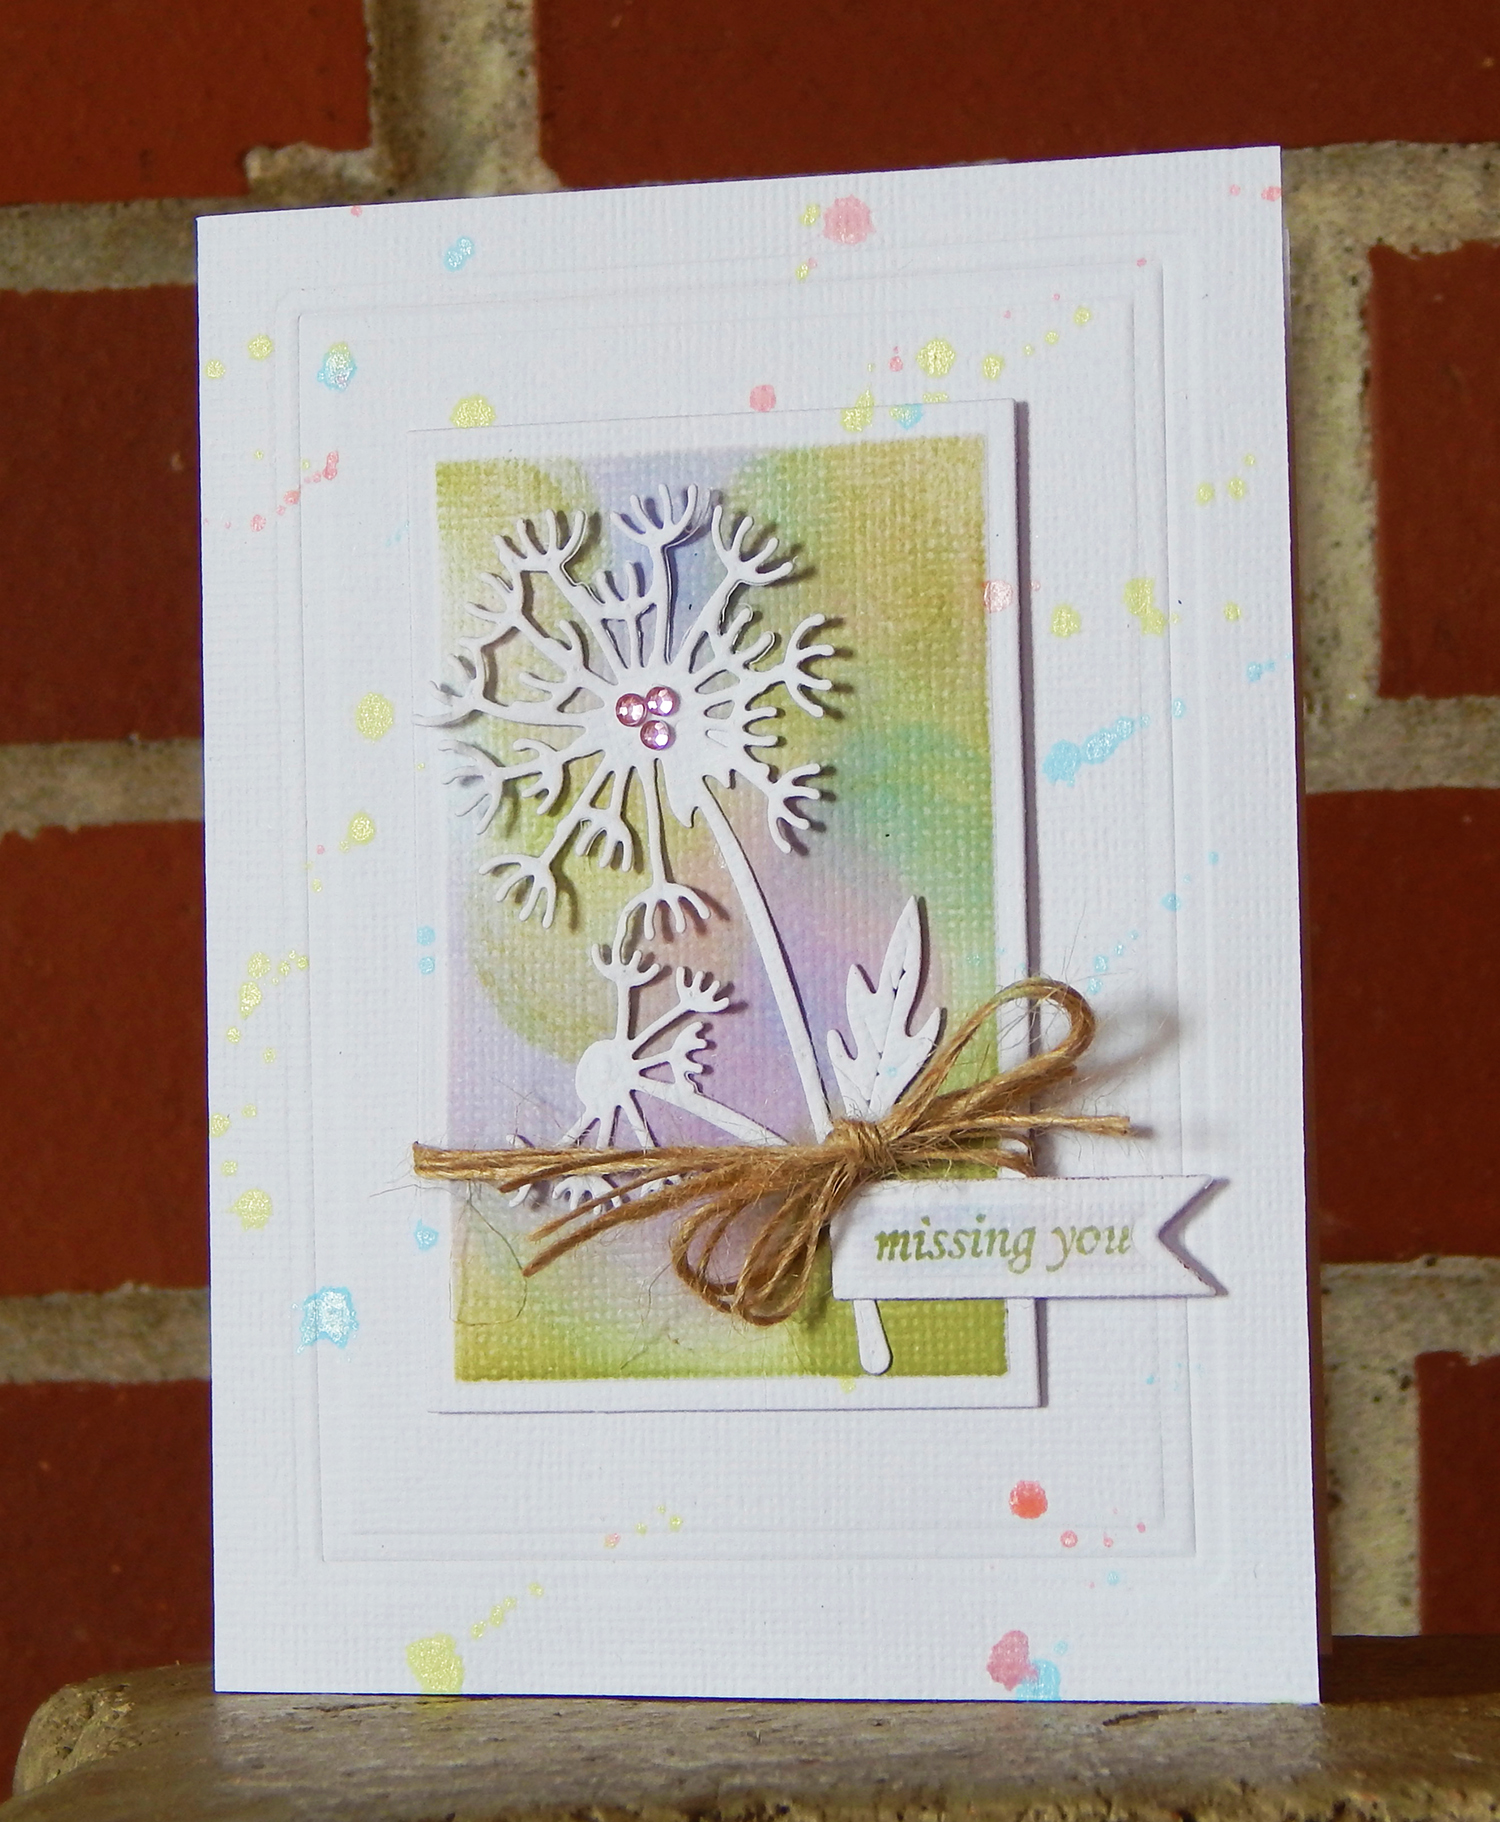 Memento and Fireworks for a Missing You Card